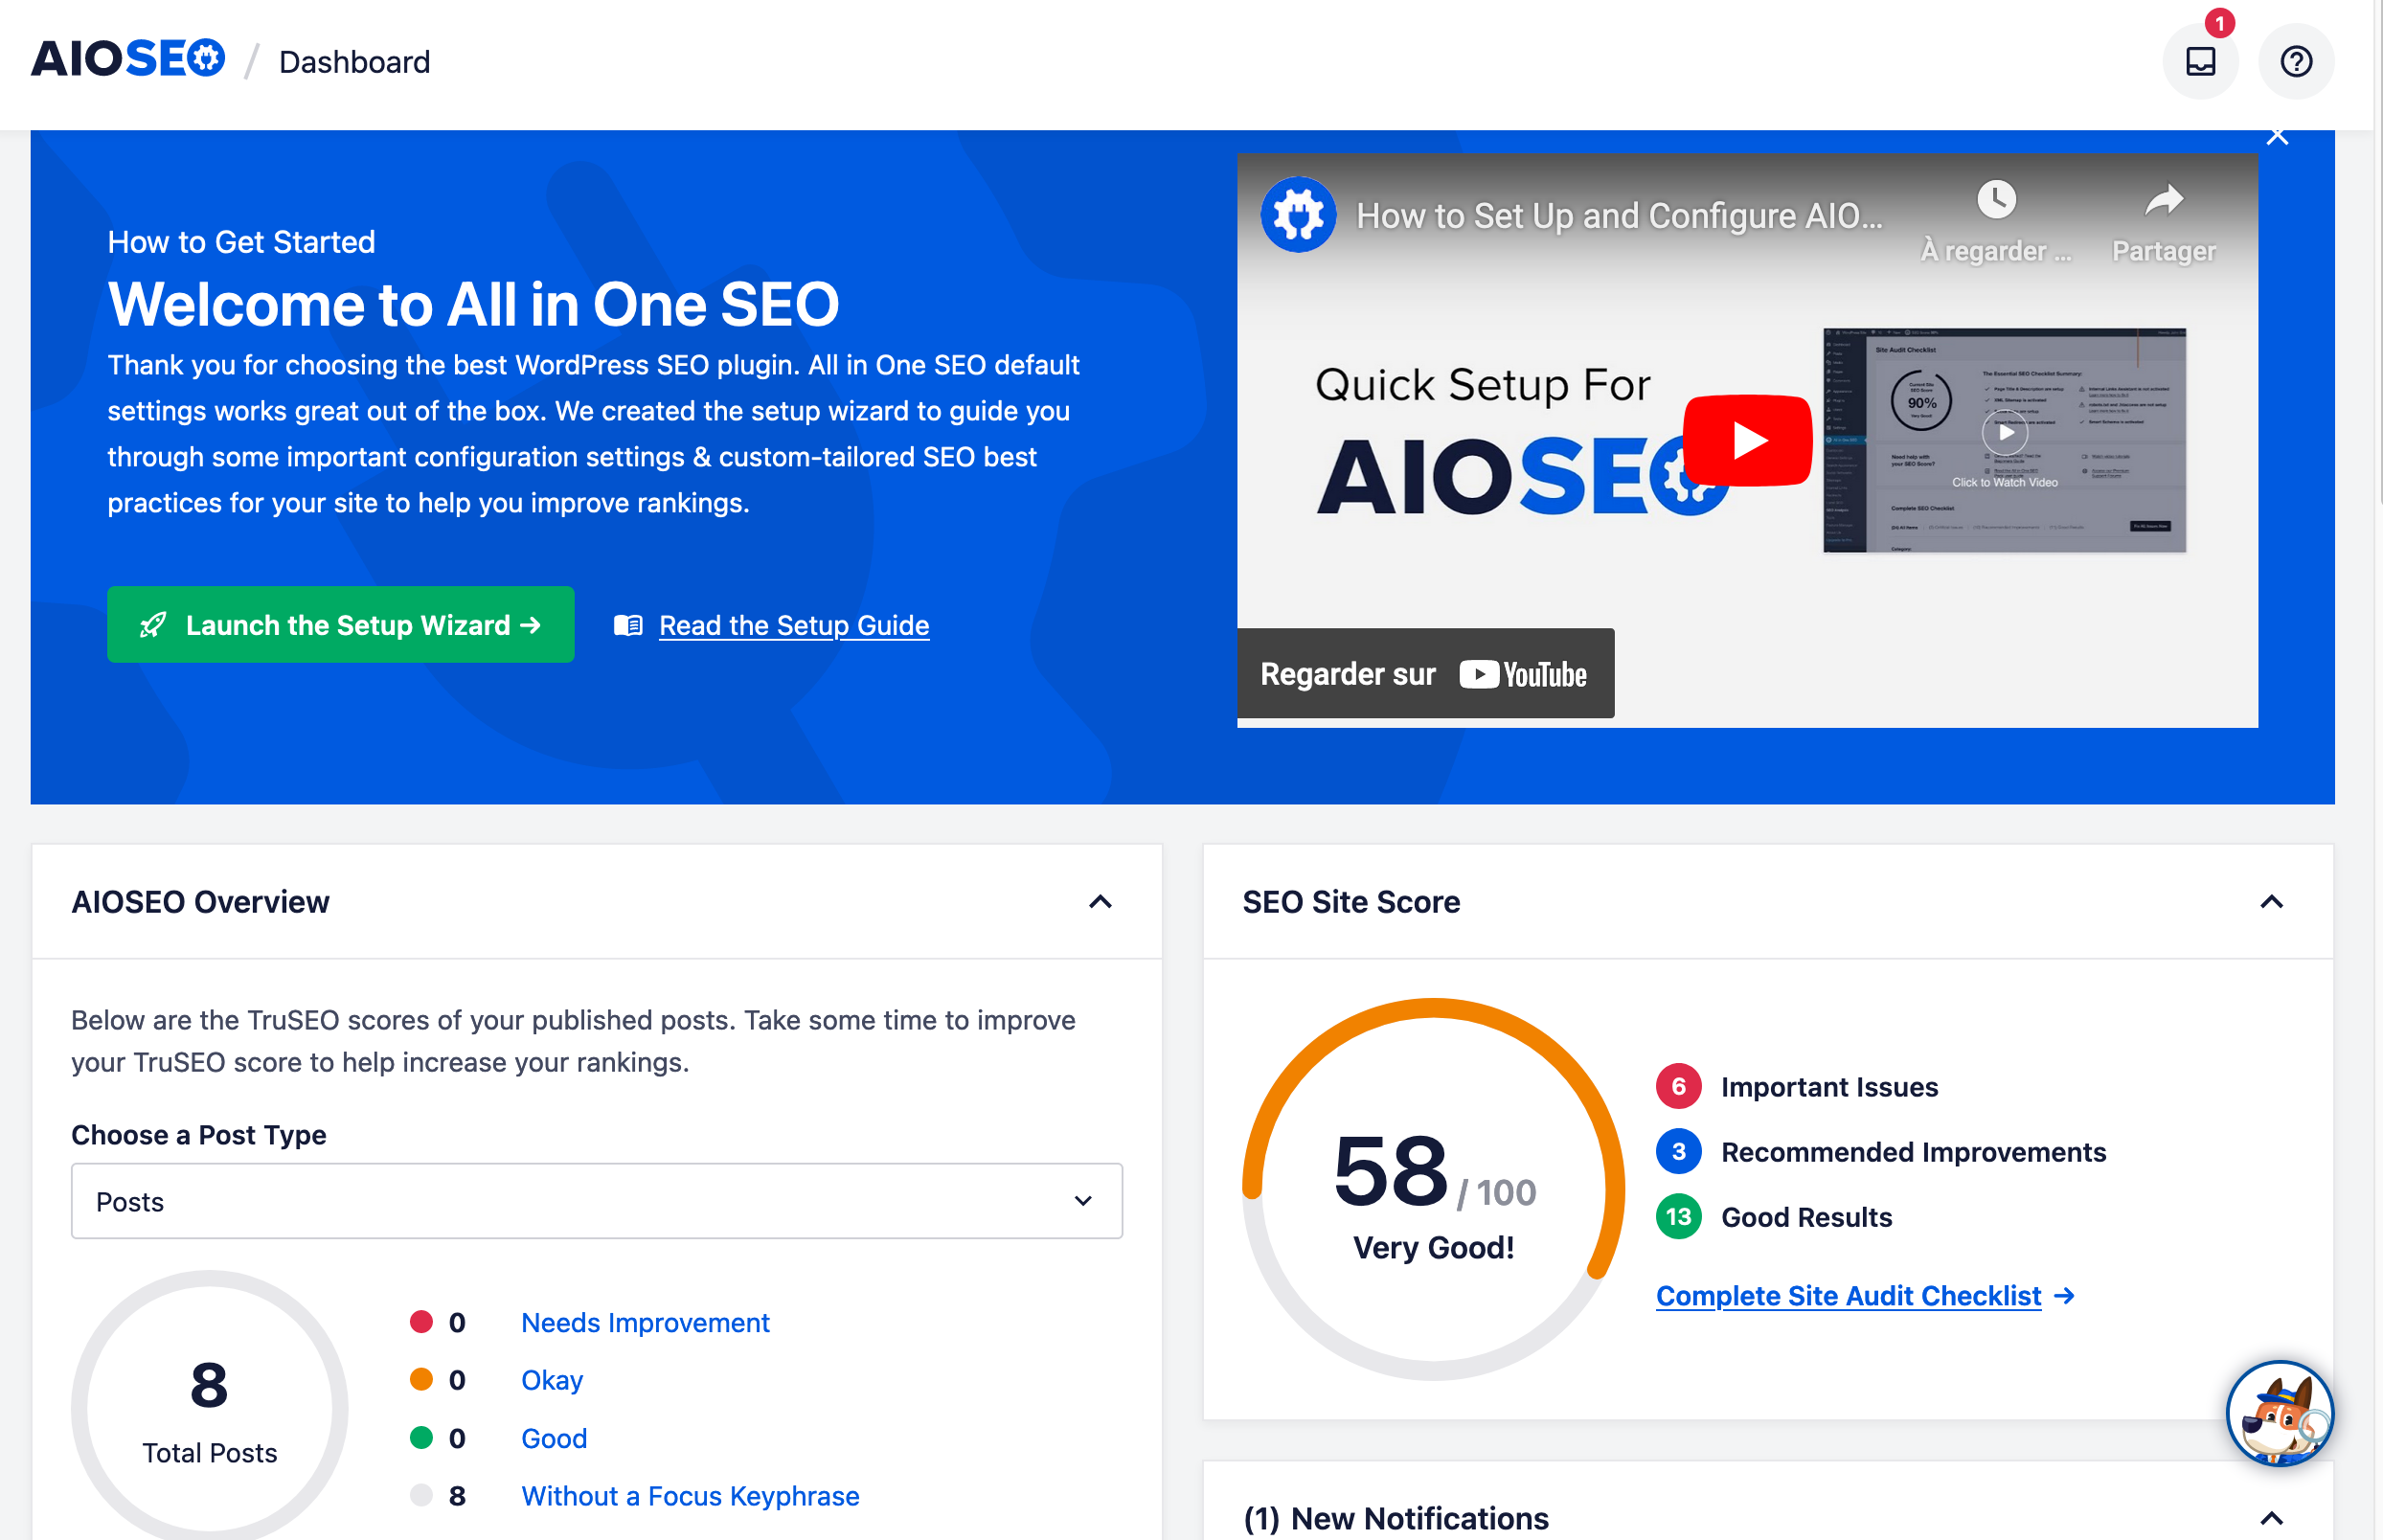 The AIOSEO dashboard gives sites an SEO score.